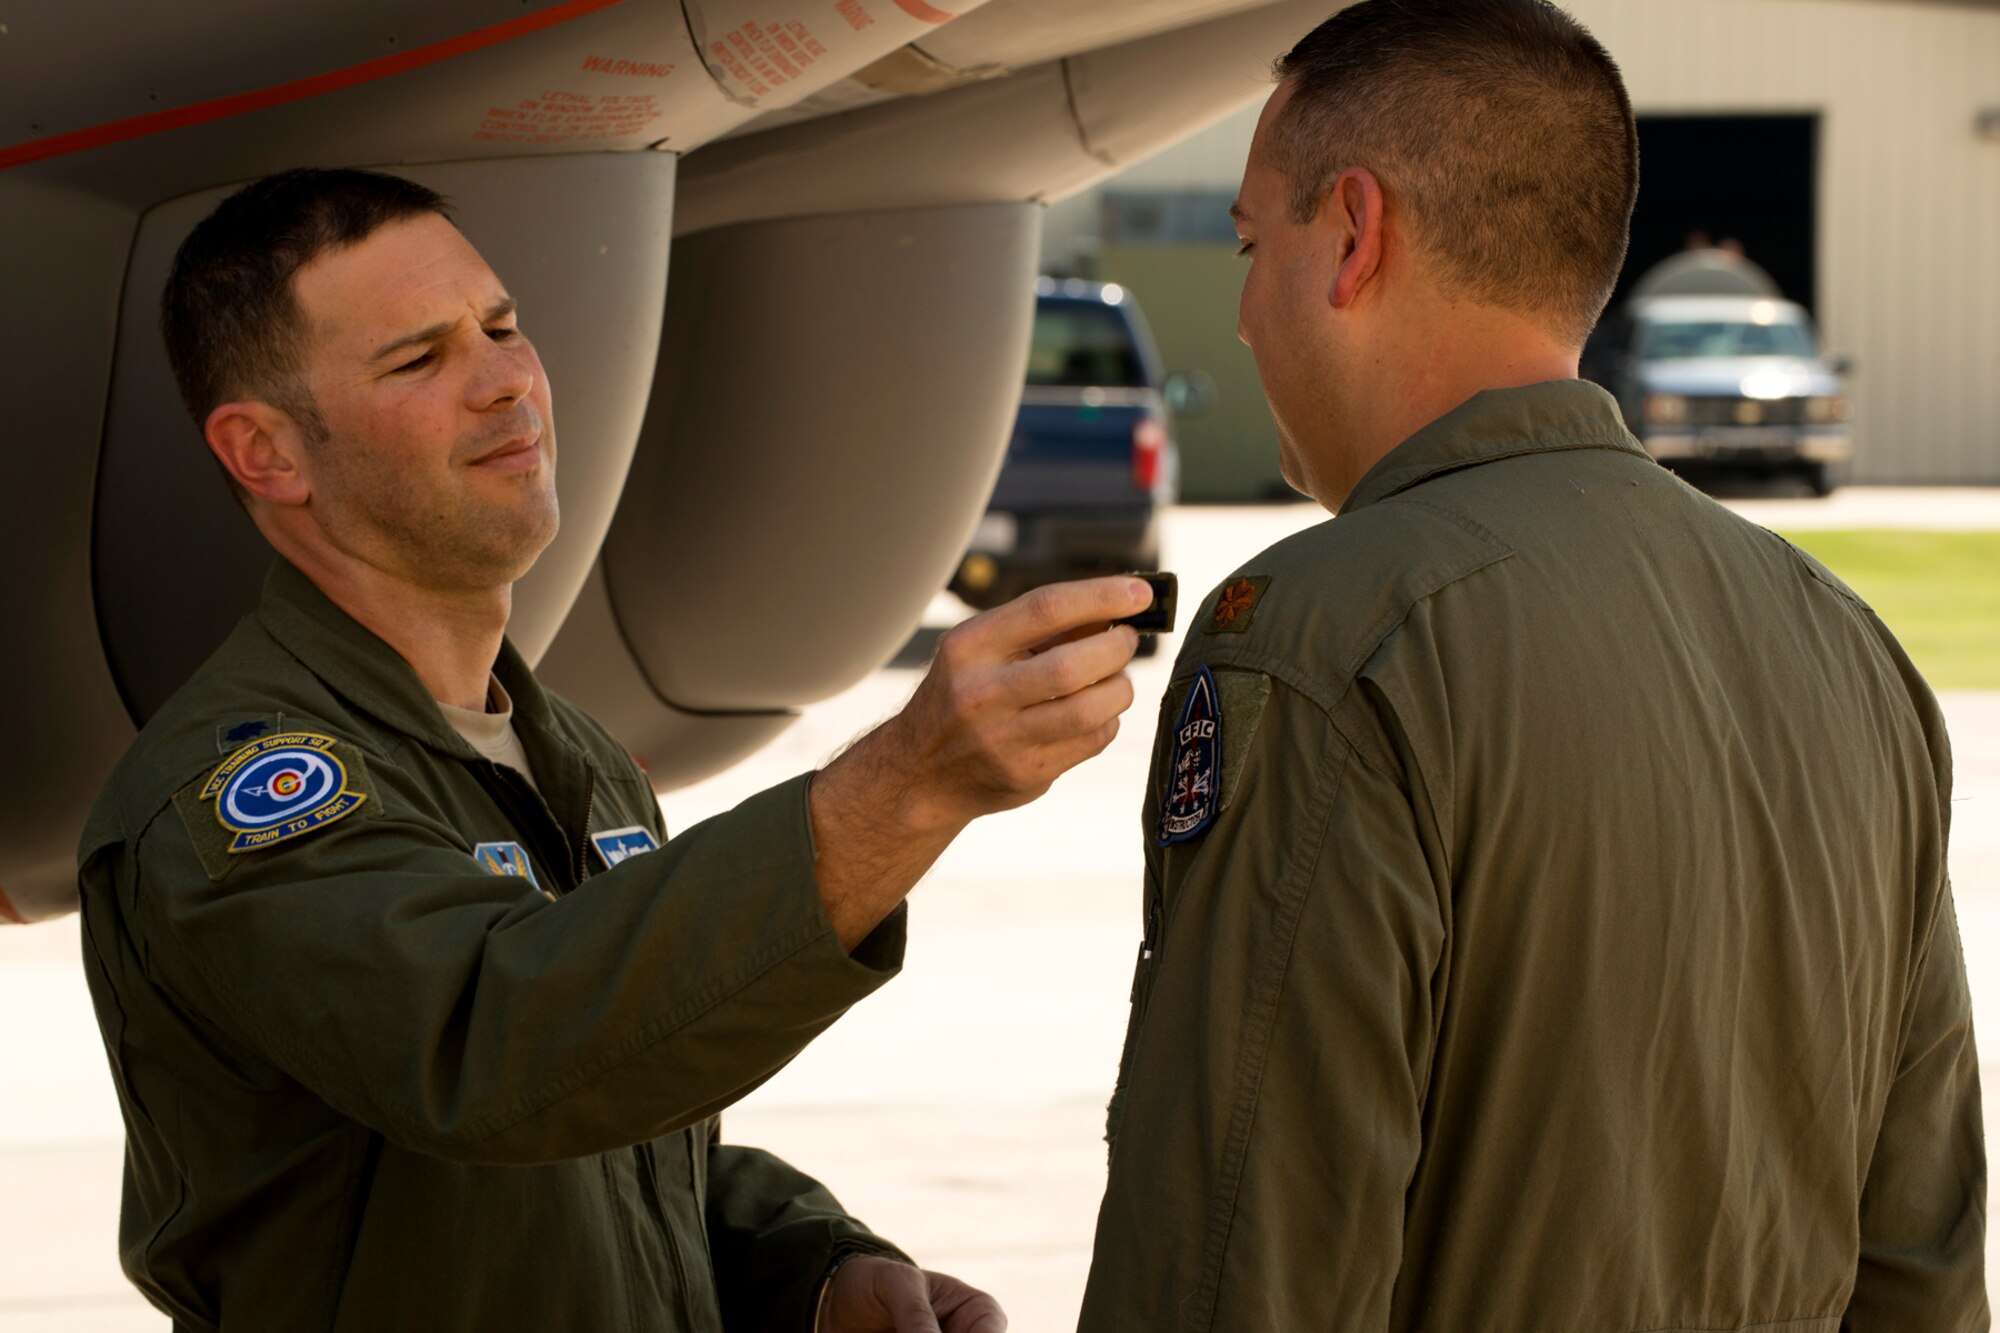 U.S. Air Force Lt. Col. Robert Bender removes the Captains rank insignia from the shoulder of Maj. Brian Heck during a Pinning On ceremony, Sept. 28, 2012, Barksdale Air Force Base, La. Heck was recently promoted to the rank of Major and is assigned to the 11th Bomb Squadron at Barksdale. (U.S. Air Force photo by Master Sgt. Greg Steele/Released)